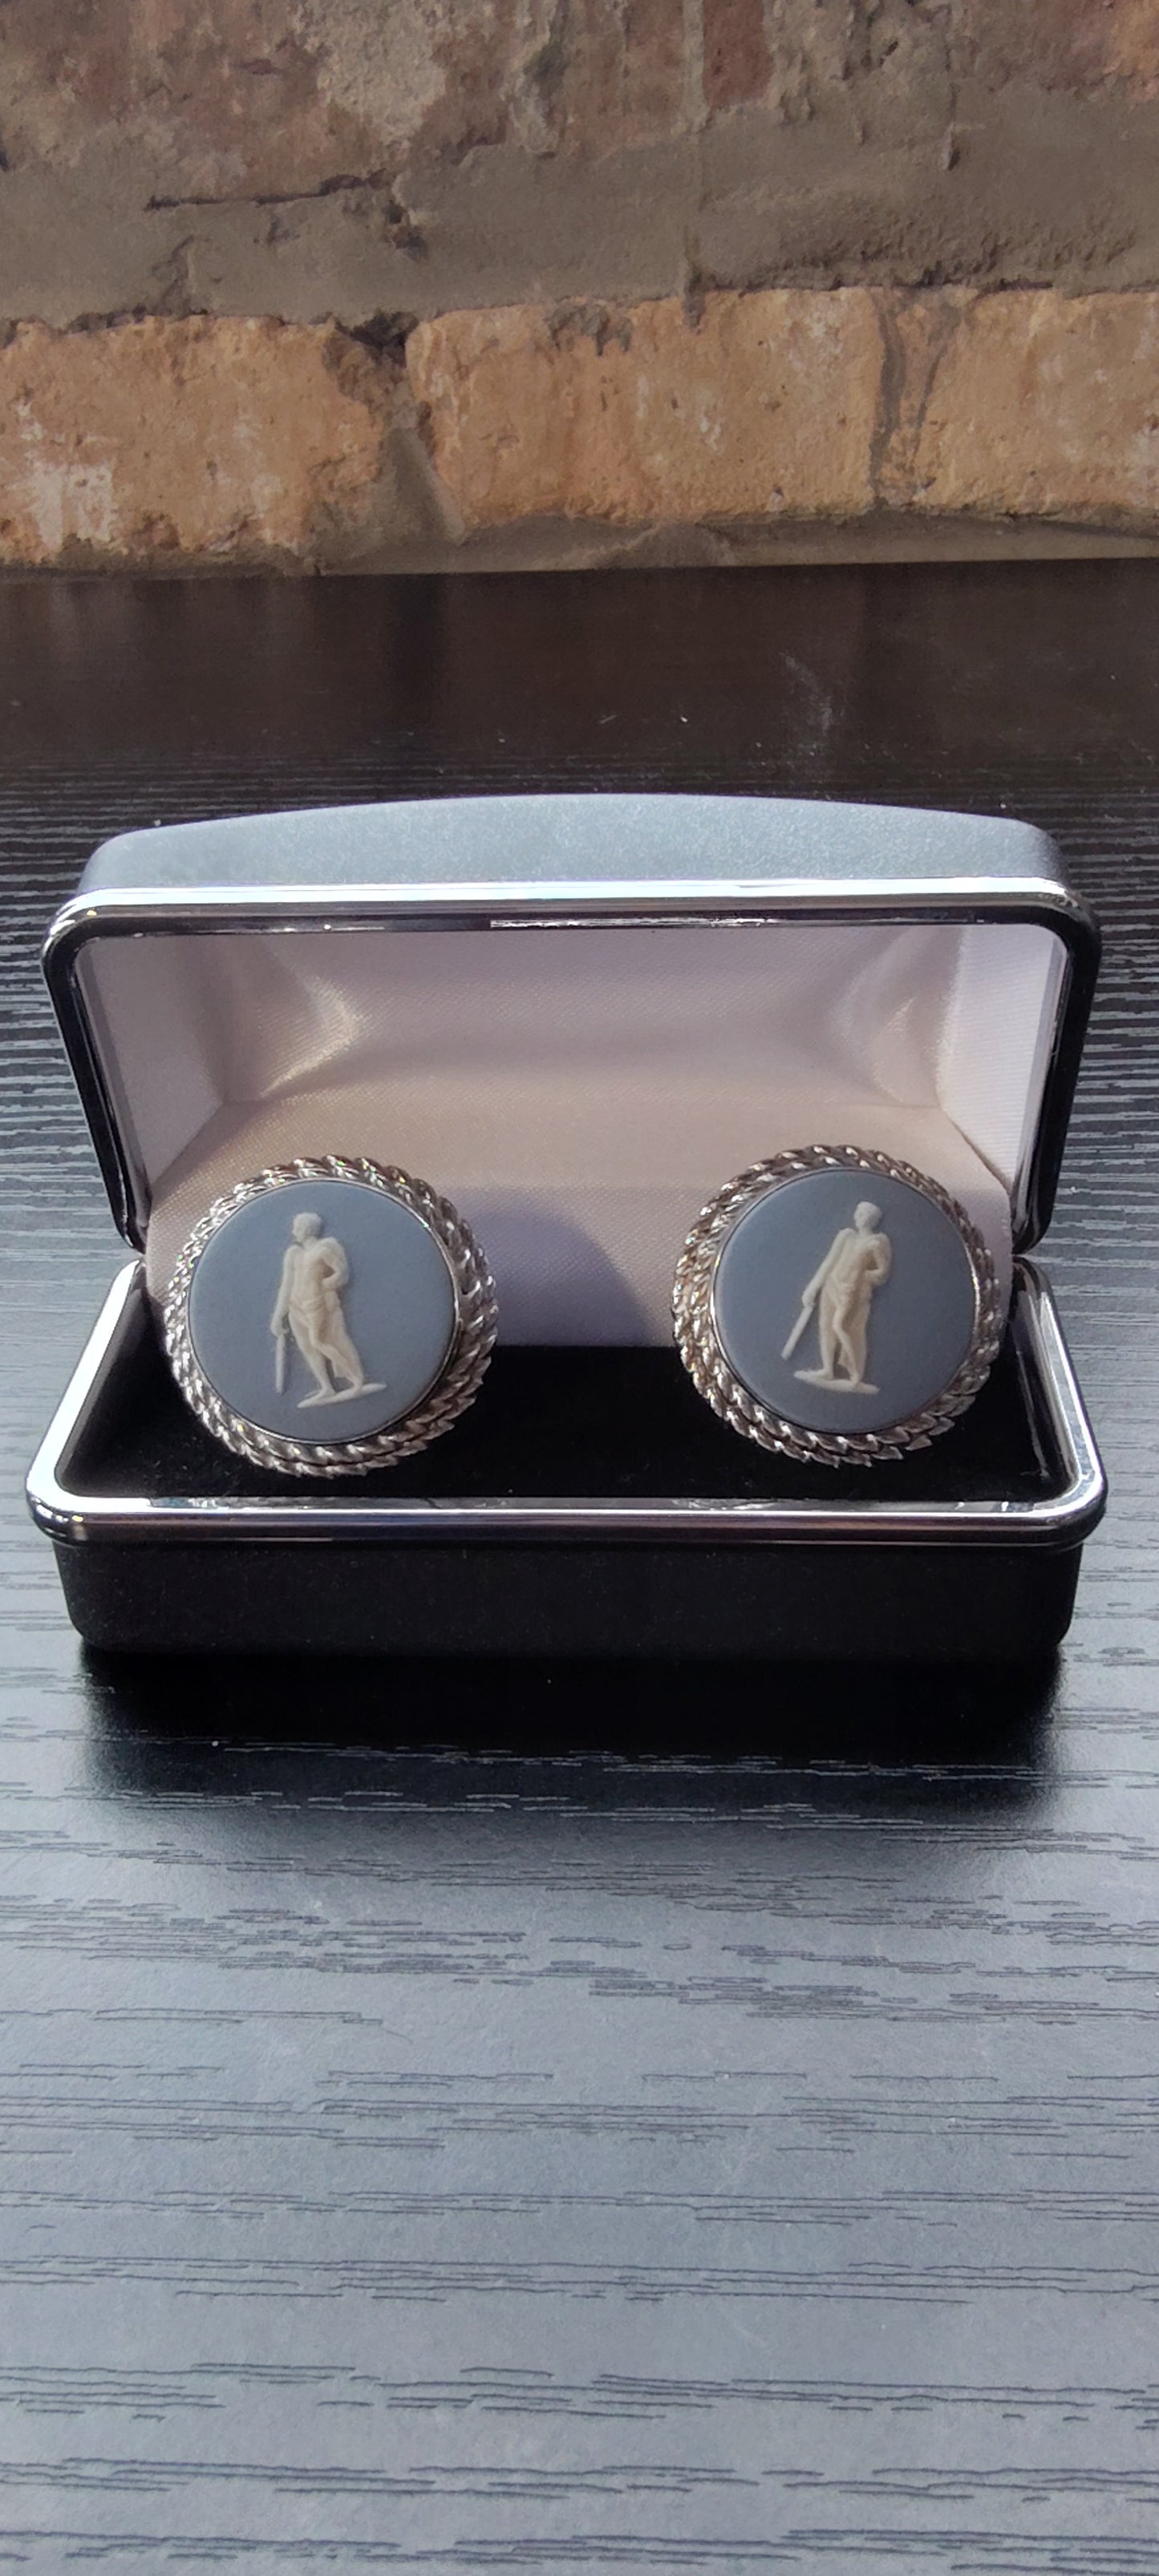 SILVER AND BLUE CUFFLINKS [1PERSON]